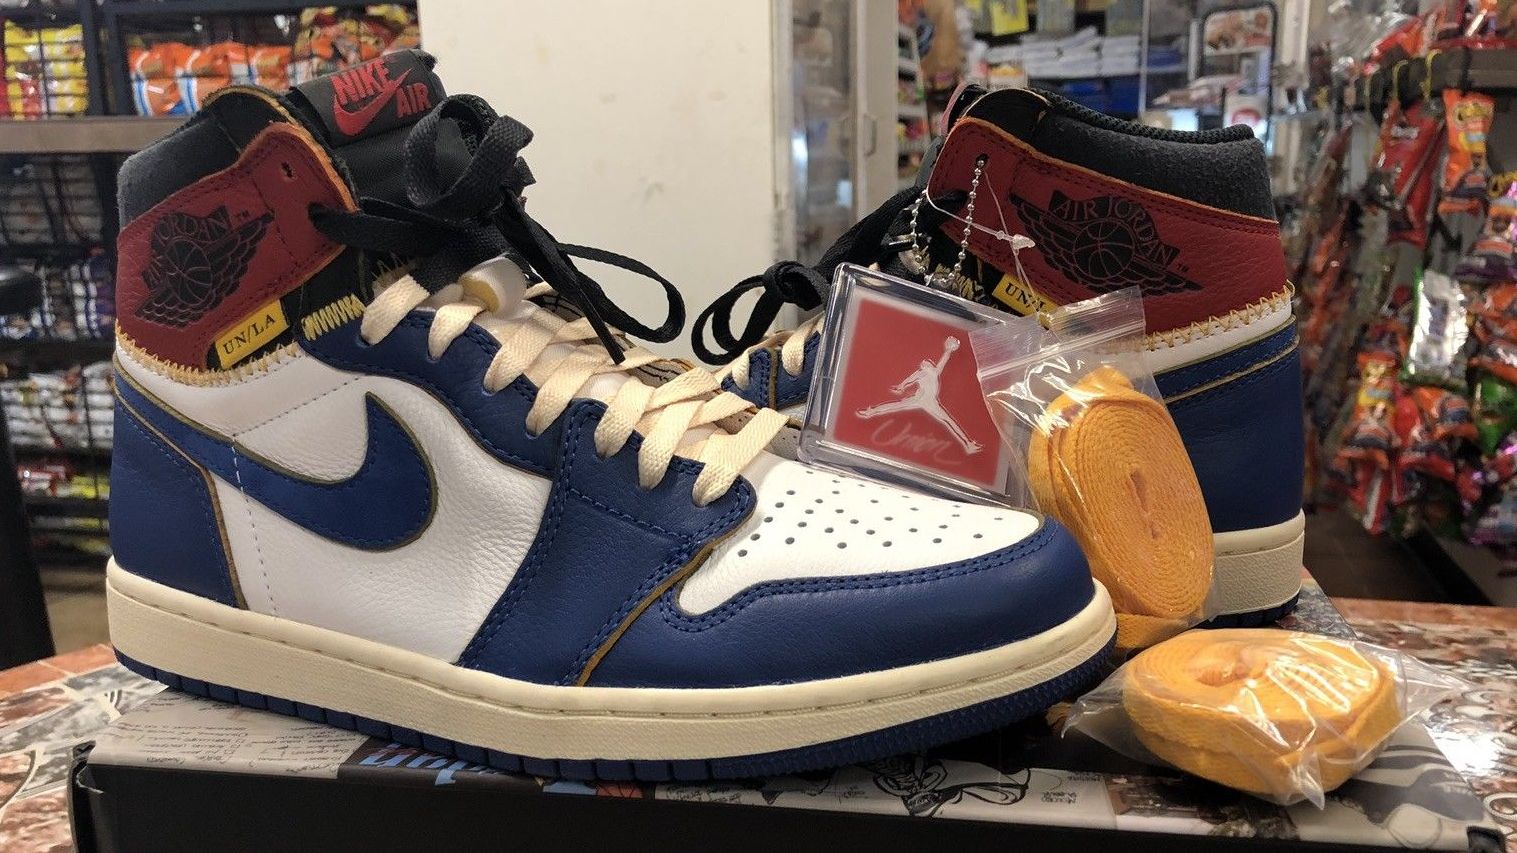 Union's Unreleased Jordan 1 Collab Available Early | Complex